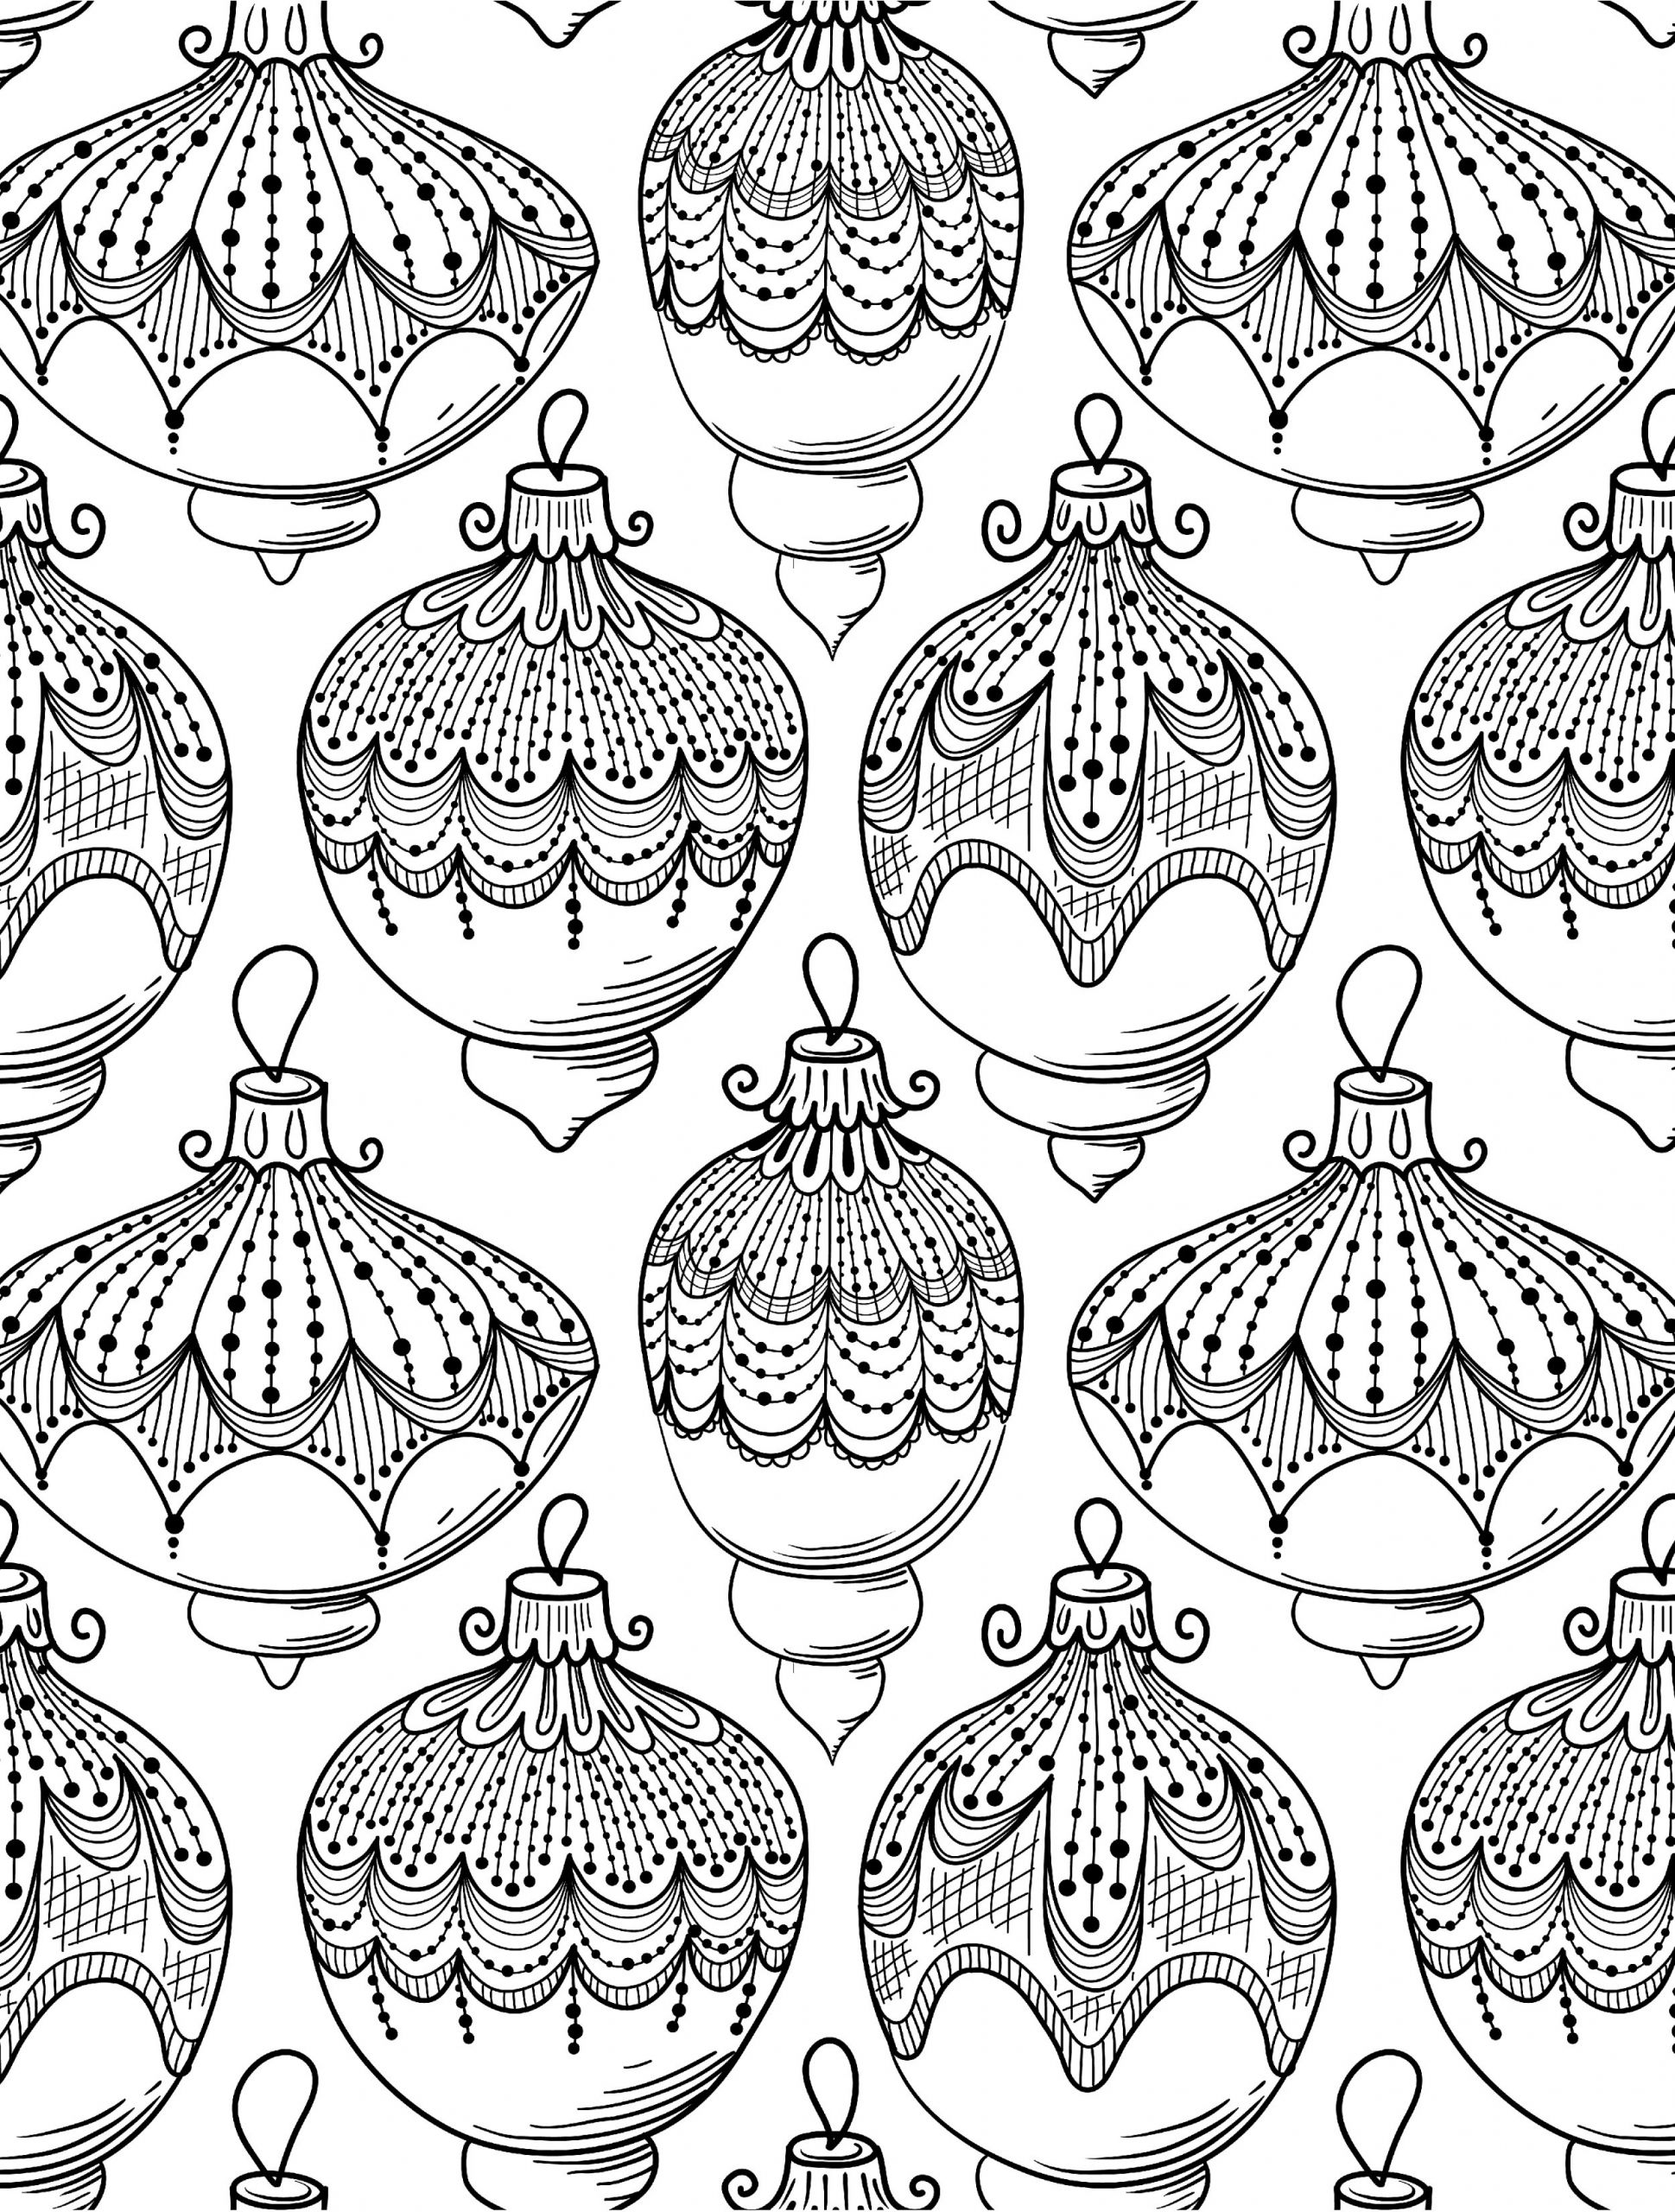 Winter Coloring Pages For Adults
 Winter Coloring Pages for Adults Best Coloring Pages For